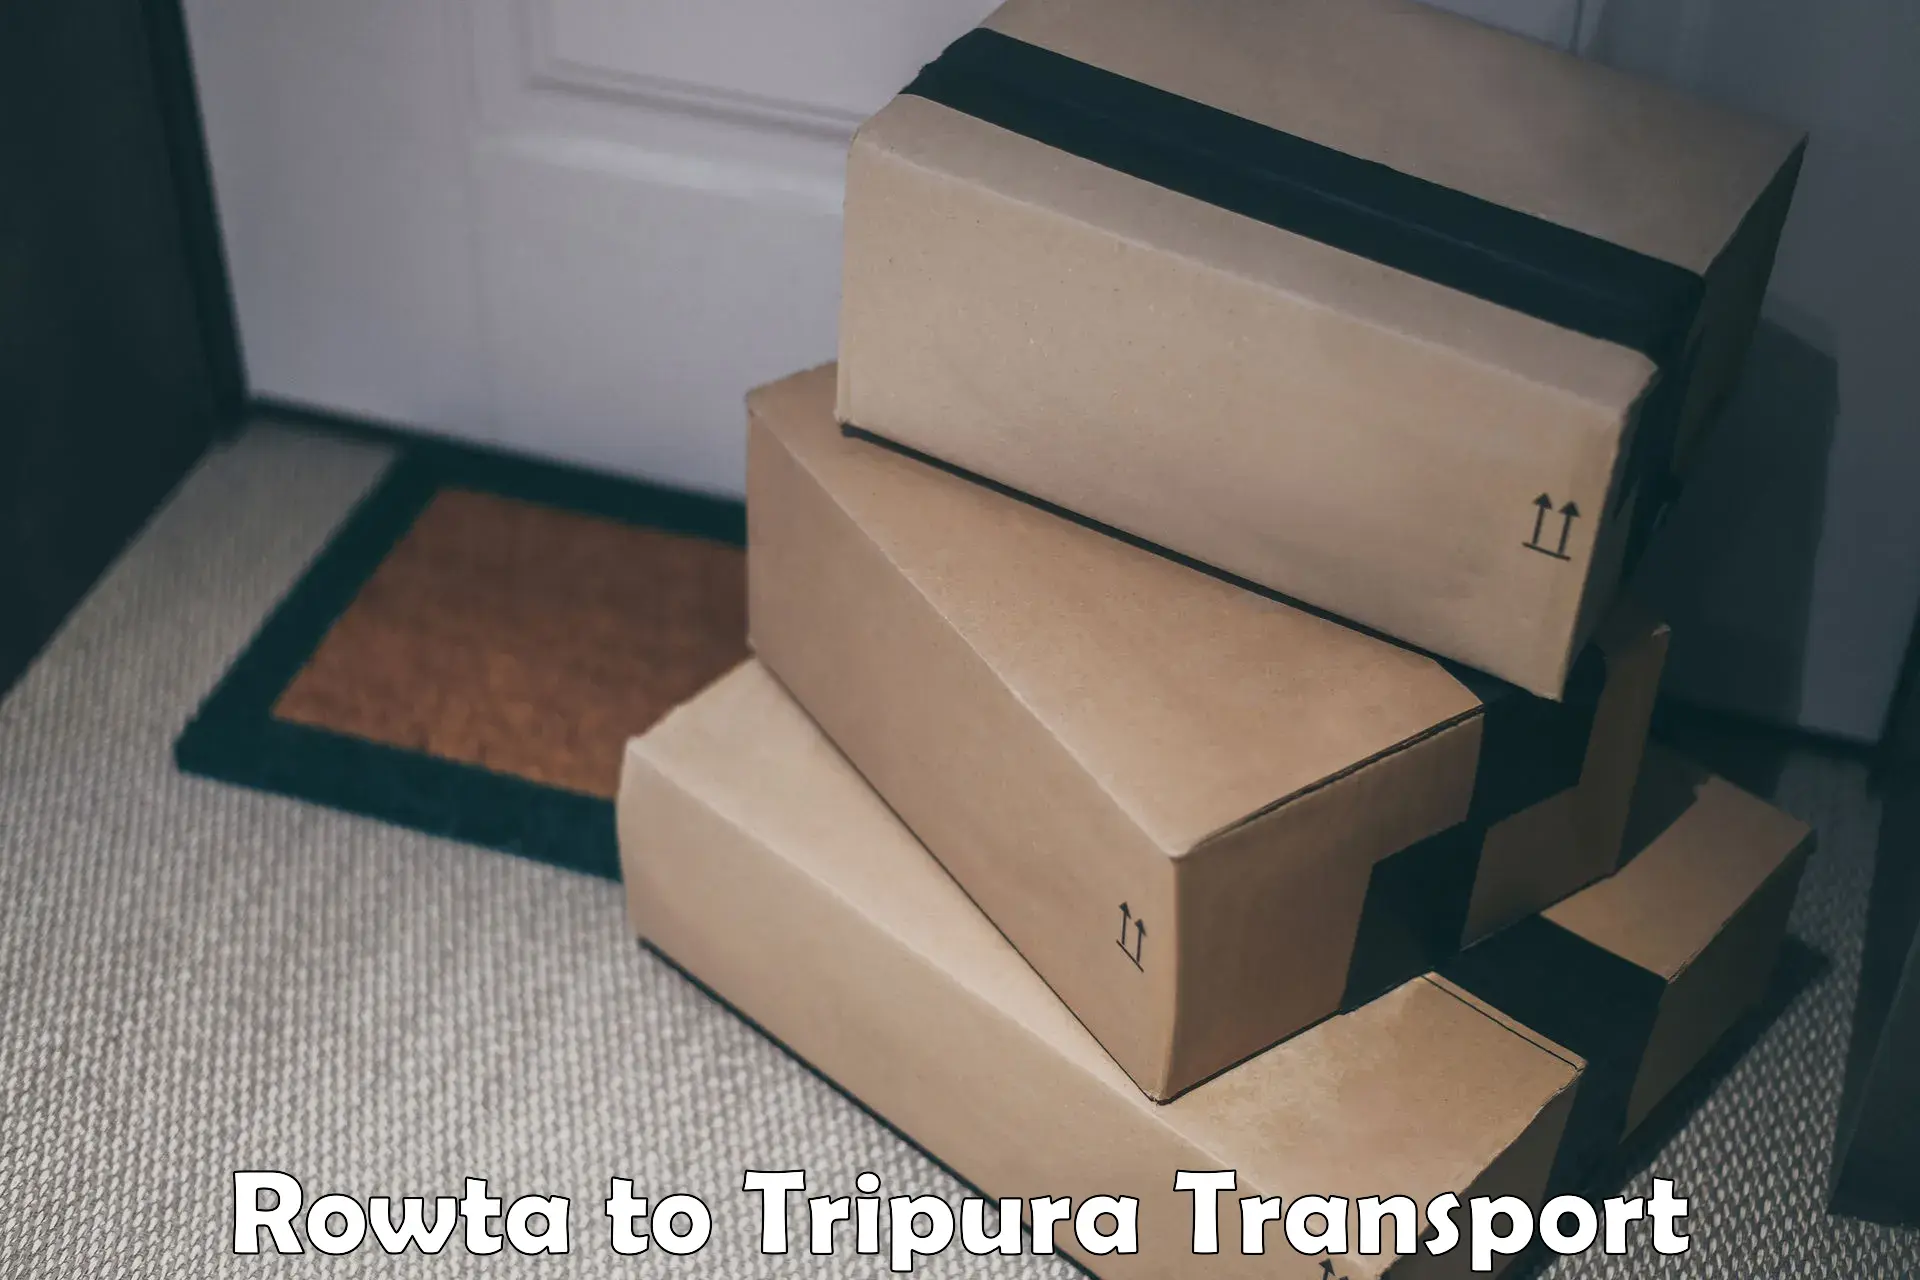 Commercial transport service Rowta to Udaipur Tripura